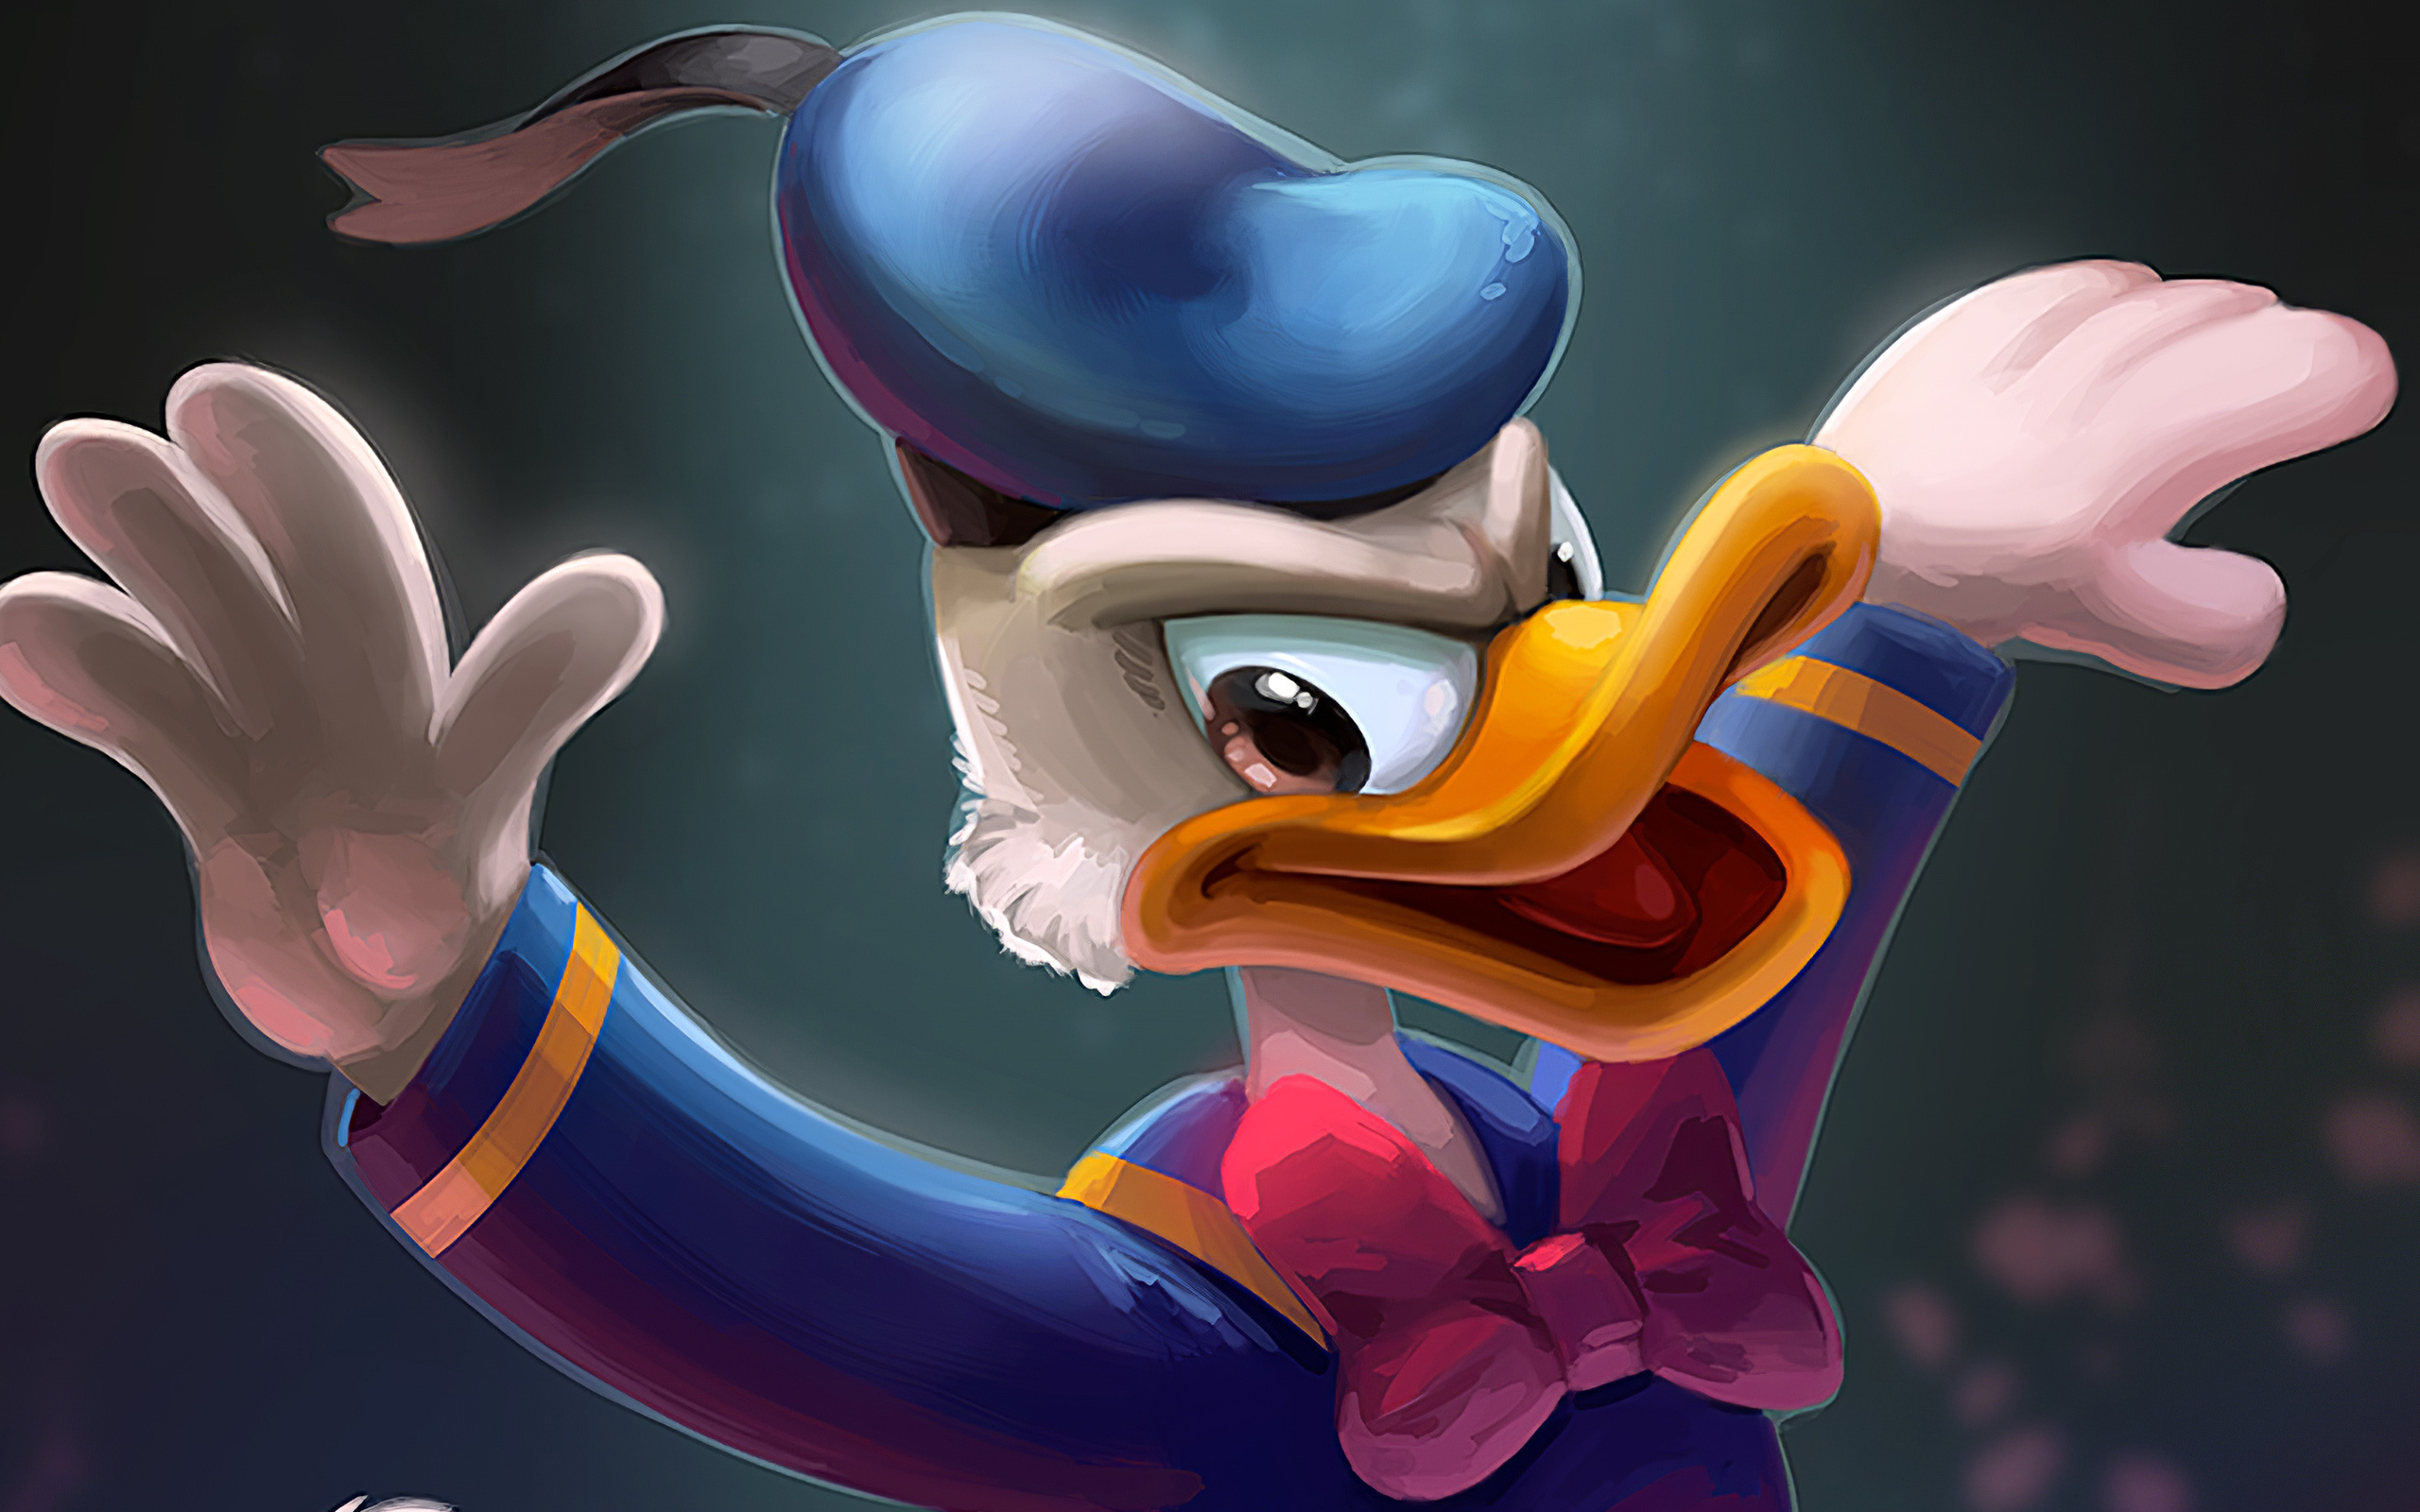 Donald Duck: An animated character created by Walt Disney as a foil to Mickey Mouse. 2560x1600 HD Wallpaper.